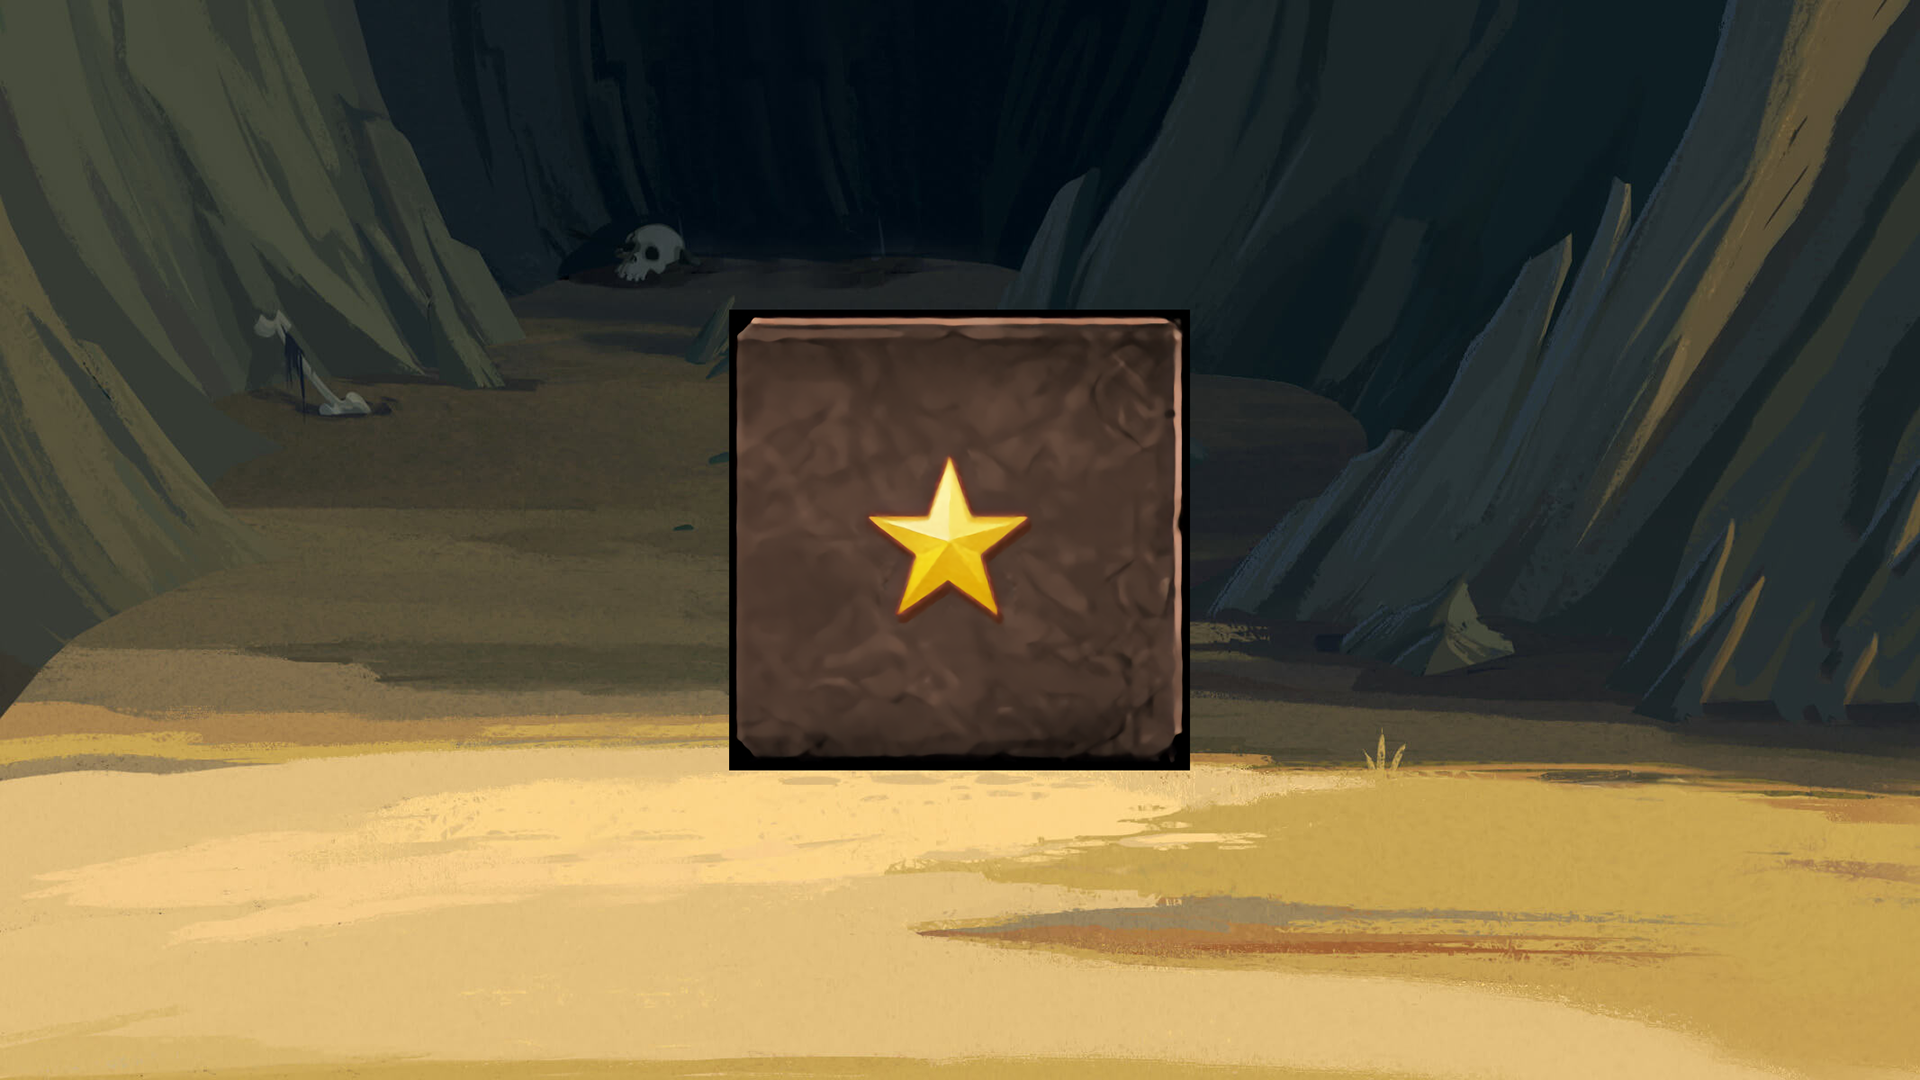 You get a Gold Star!